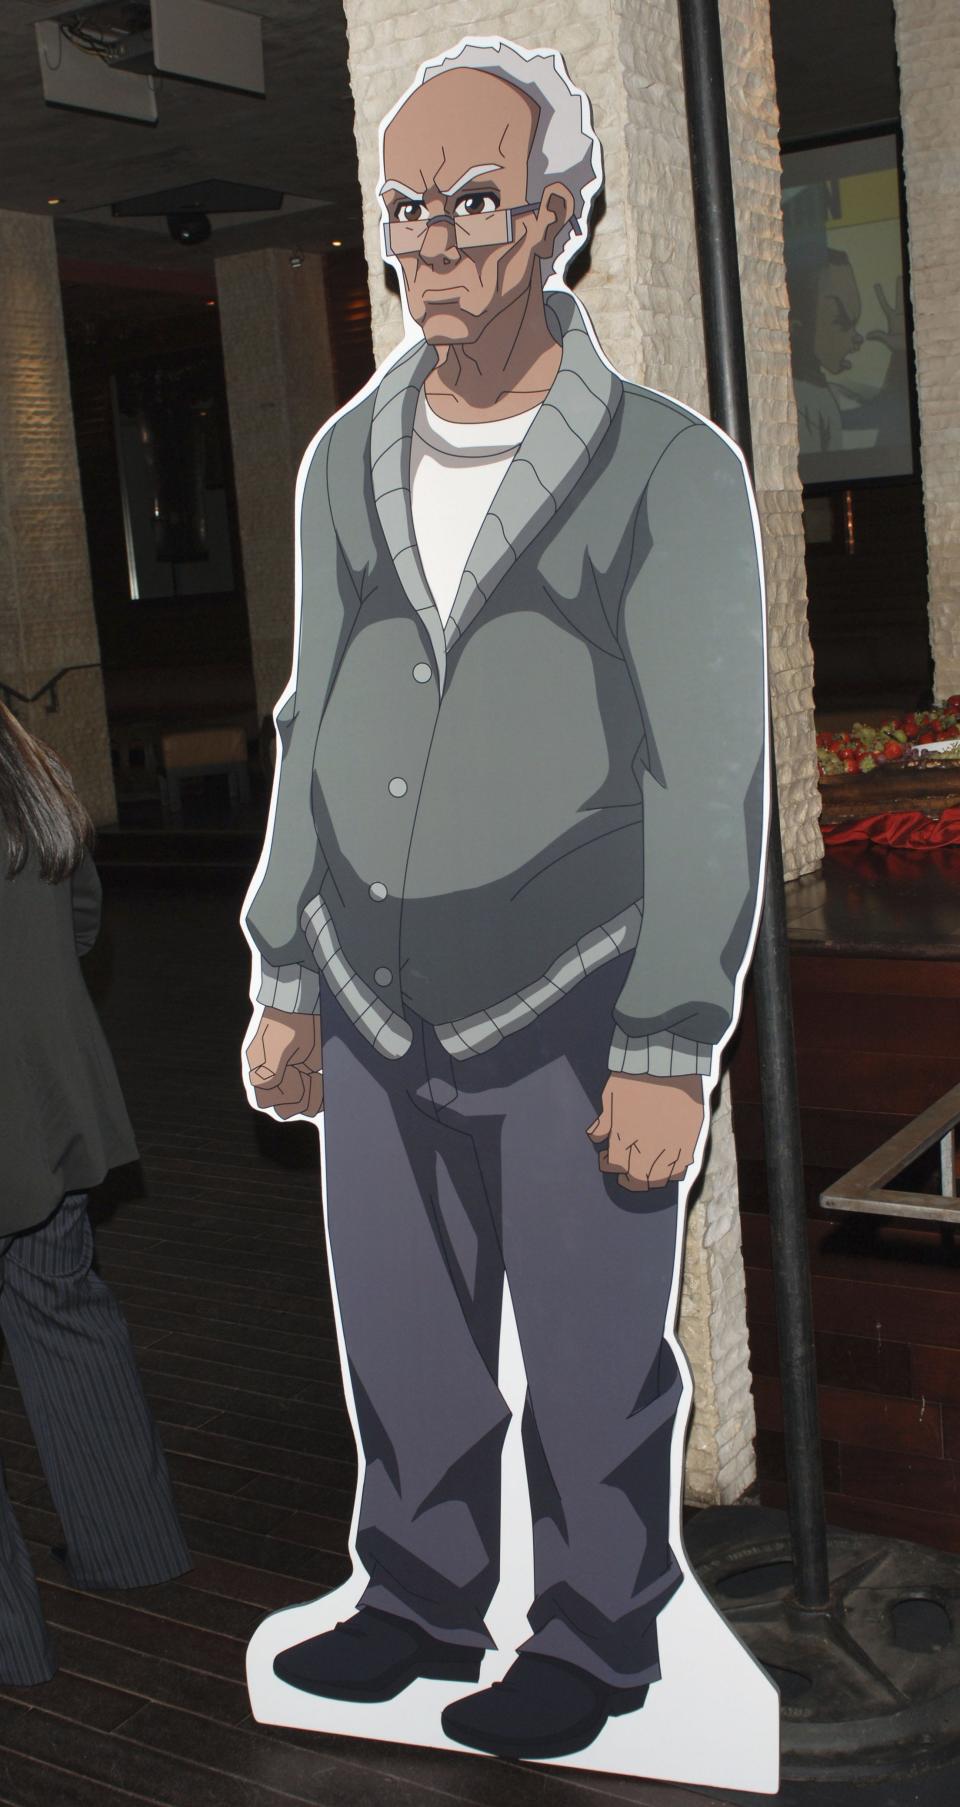 The character Robert 'Grandad' Freeman from the cartoon 'The Boondocks' wasn't having a fun time in an episode inspired that was inspired by the sitcom 'Good Times.' Pictured is a cardboard cut-out of Grandad at the Los Angeles Launch Party For The TV Series 'The Boondocks' in 2005 in Hollywood, California.